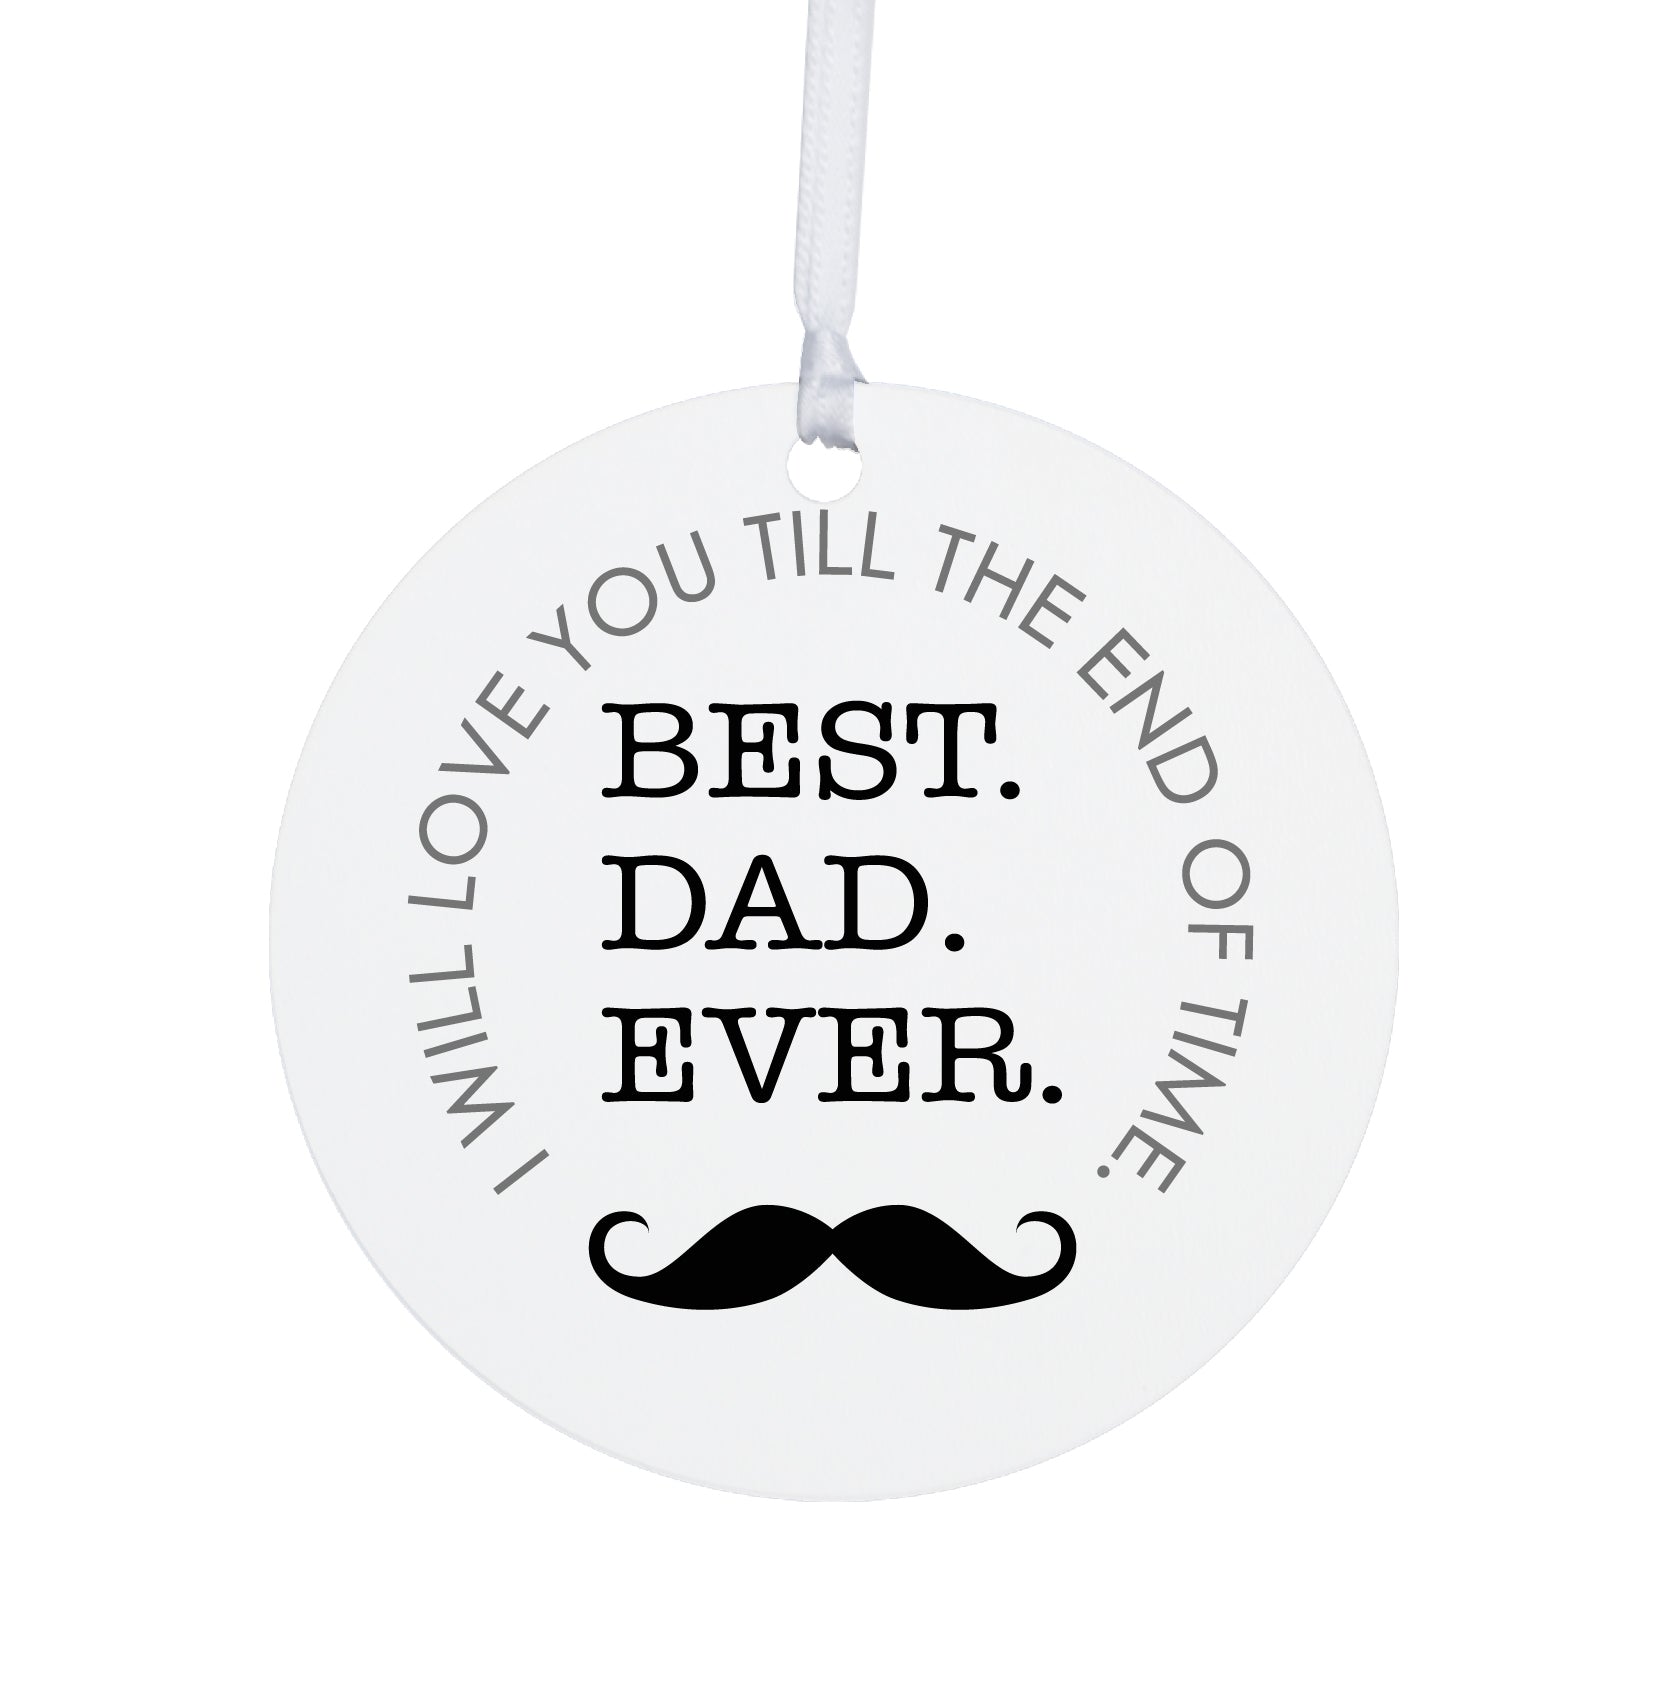 Dad White Ornament With Inspirational Message Gift Ideas - Best Dad Ever! (Mustache)